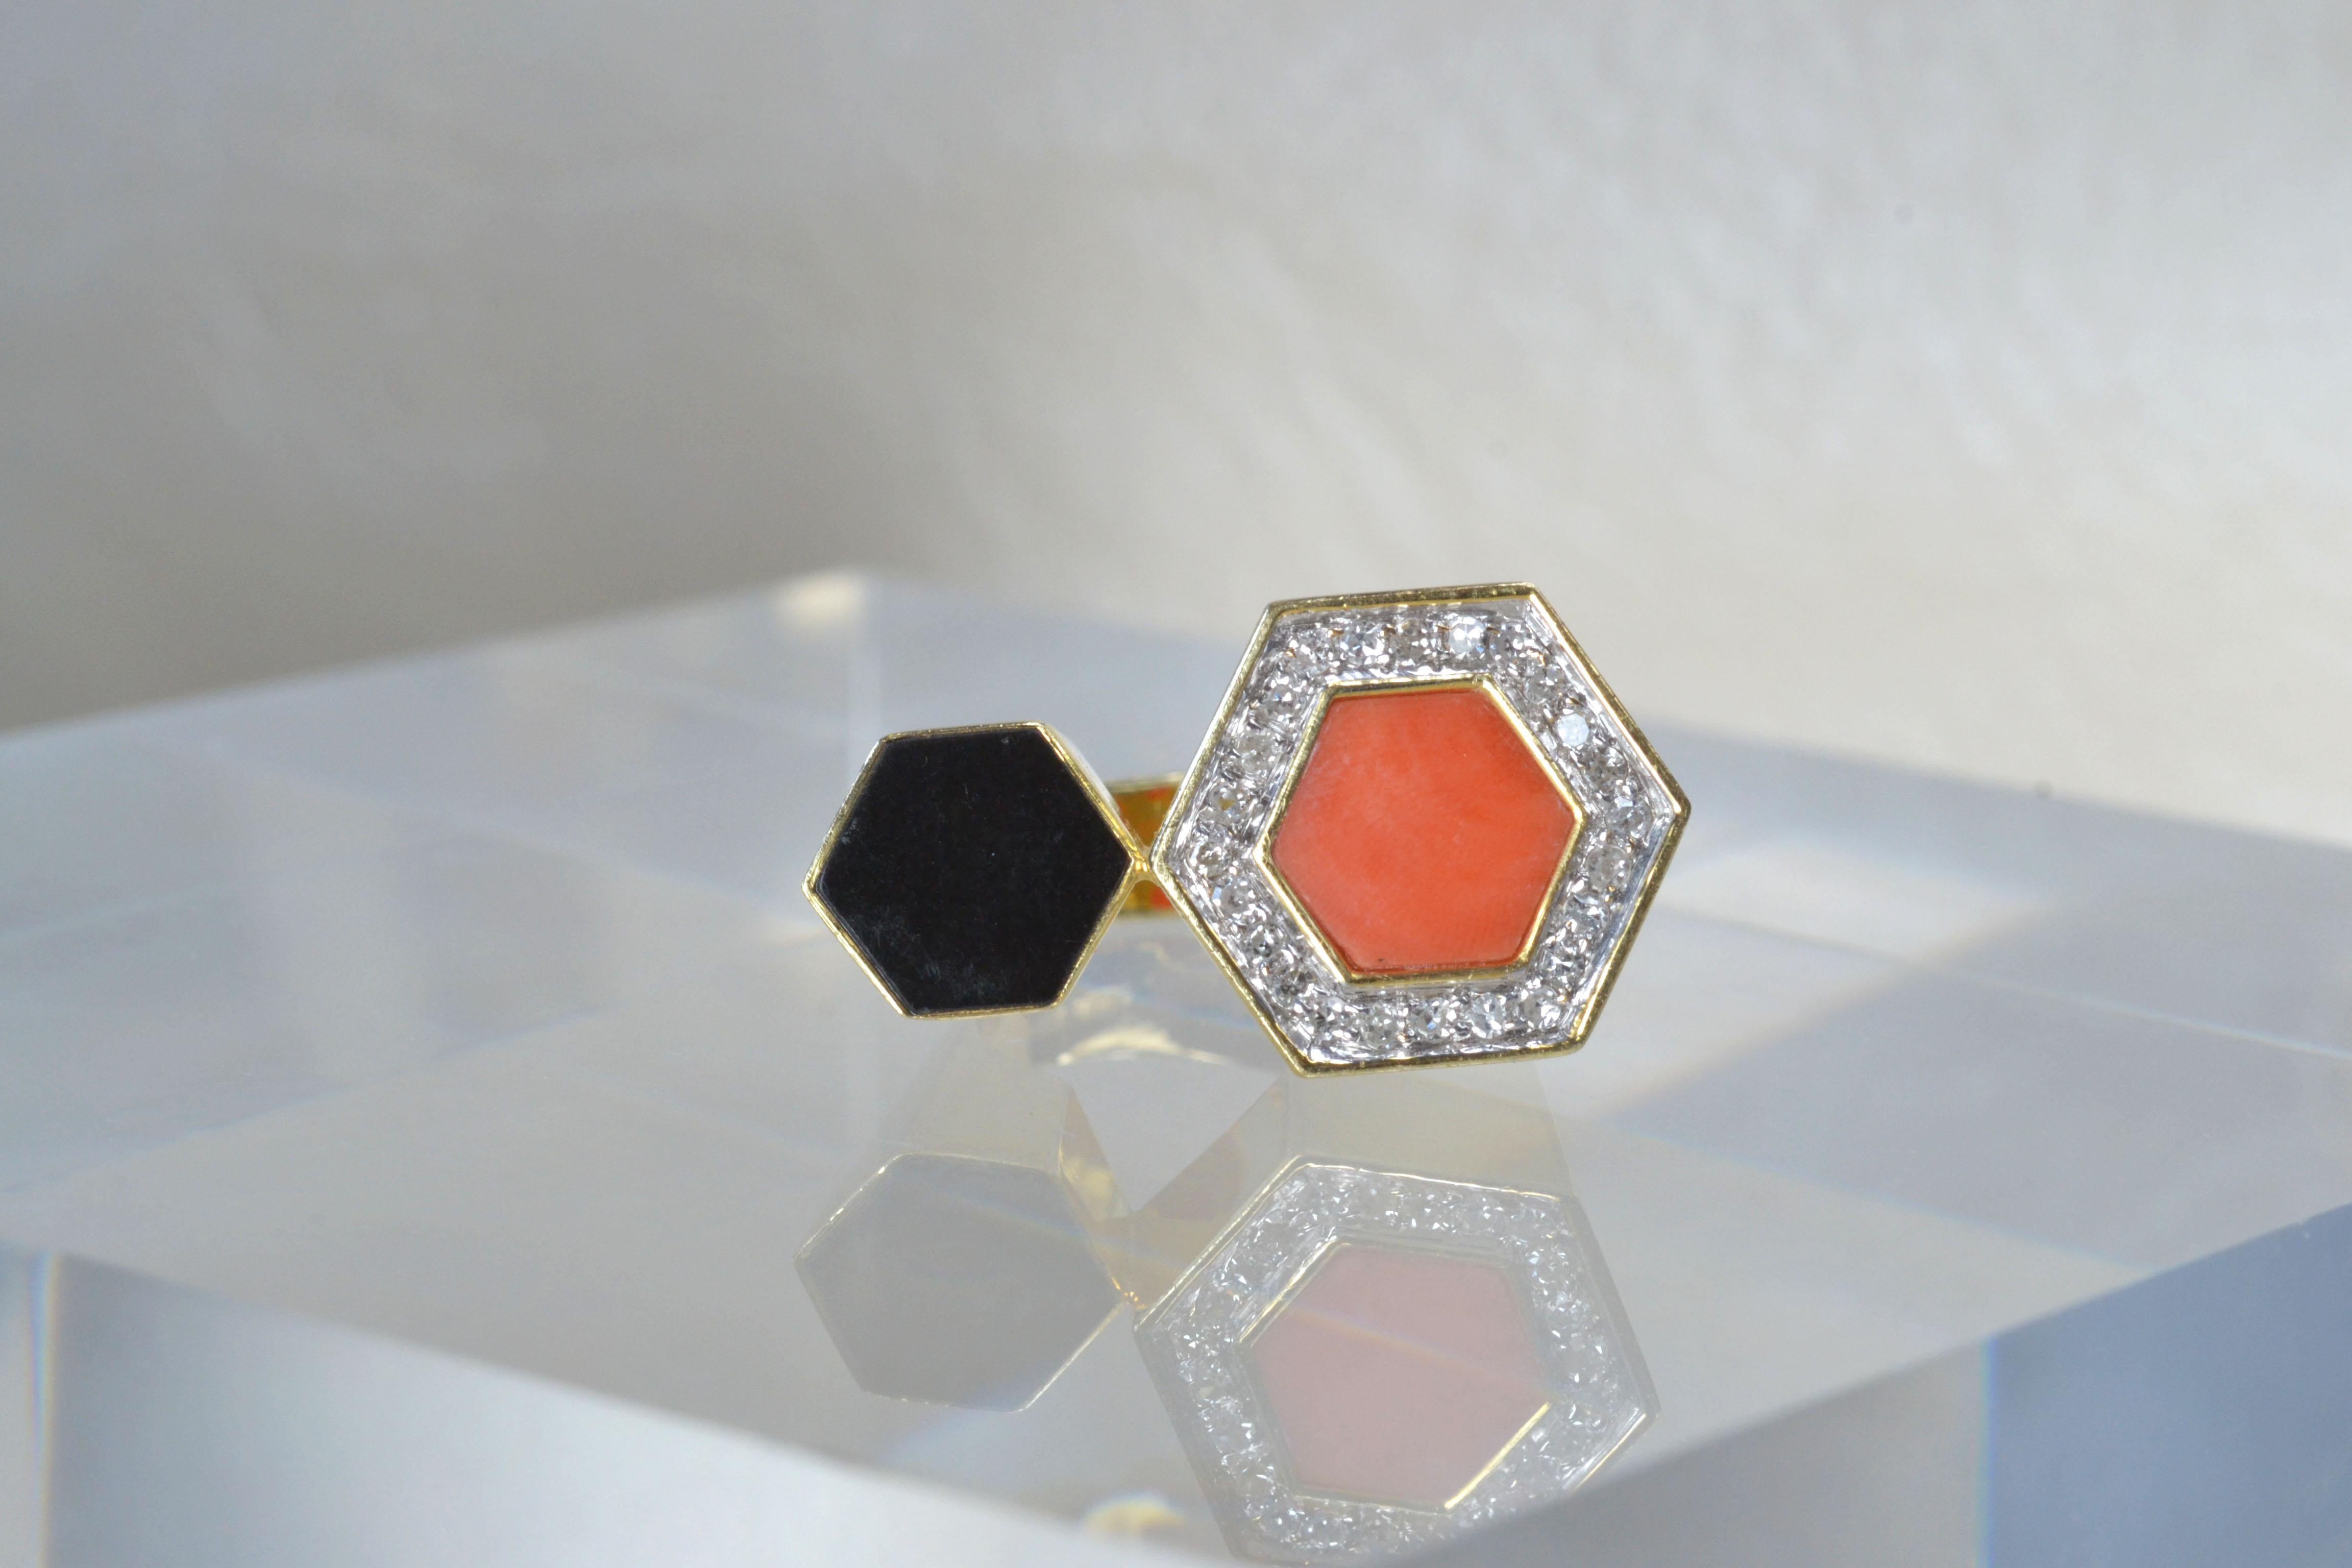 Vintage 14k Gold Coral & Onyx Ring with Diamond One-of-a-kind

This cool 14k gold ring features hexagons made of gorgeous coral encased in dazzling white diamonds and jet-black onyx. Made in the 1980s, this statement piece comfortably fits a size R